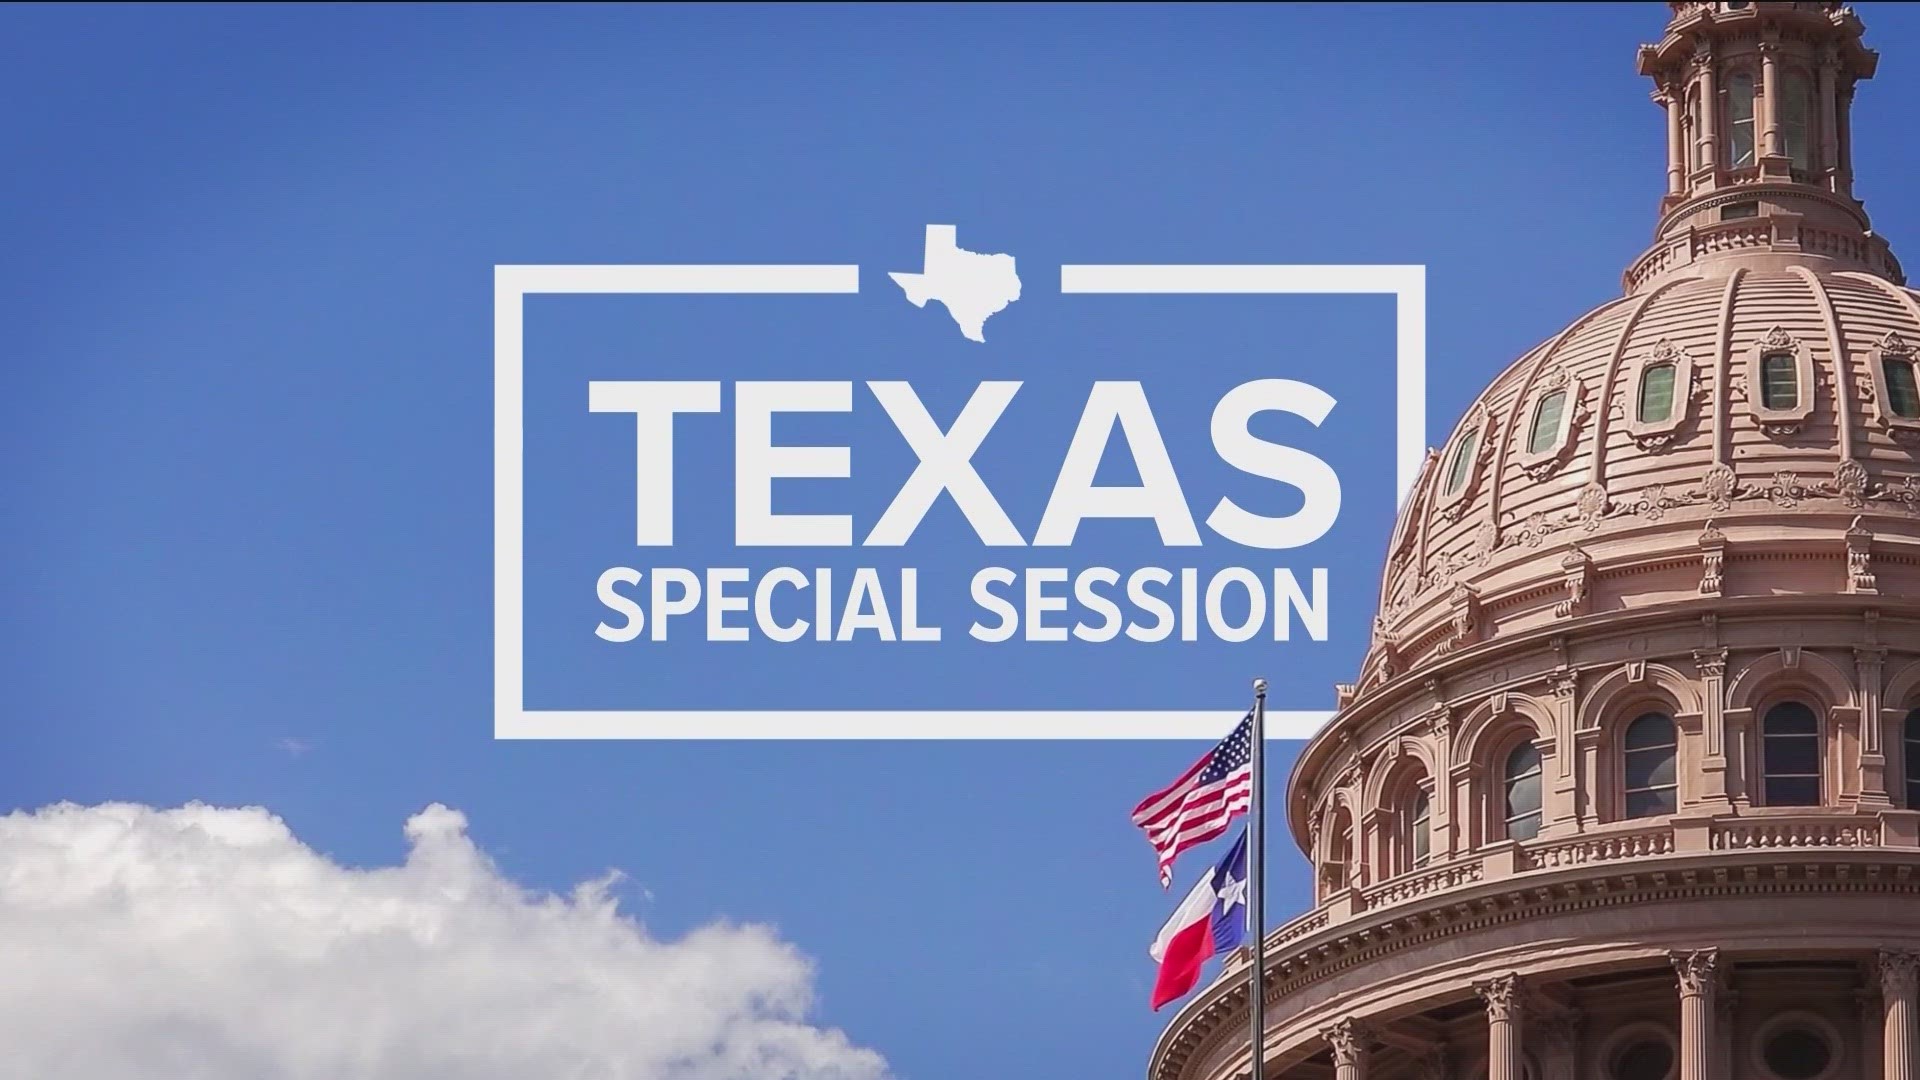 We are now halfway through the third special session of the 88th Texas Legislature.